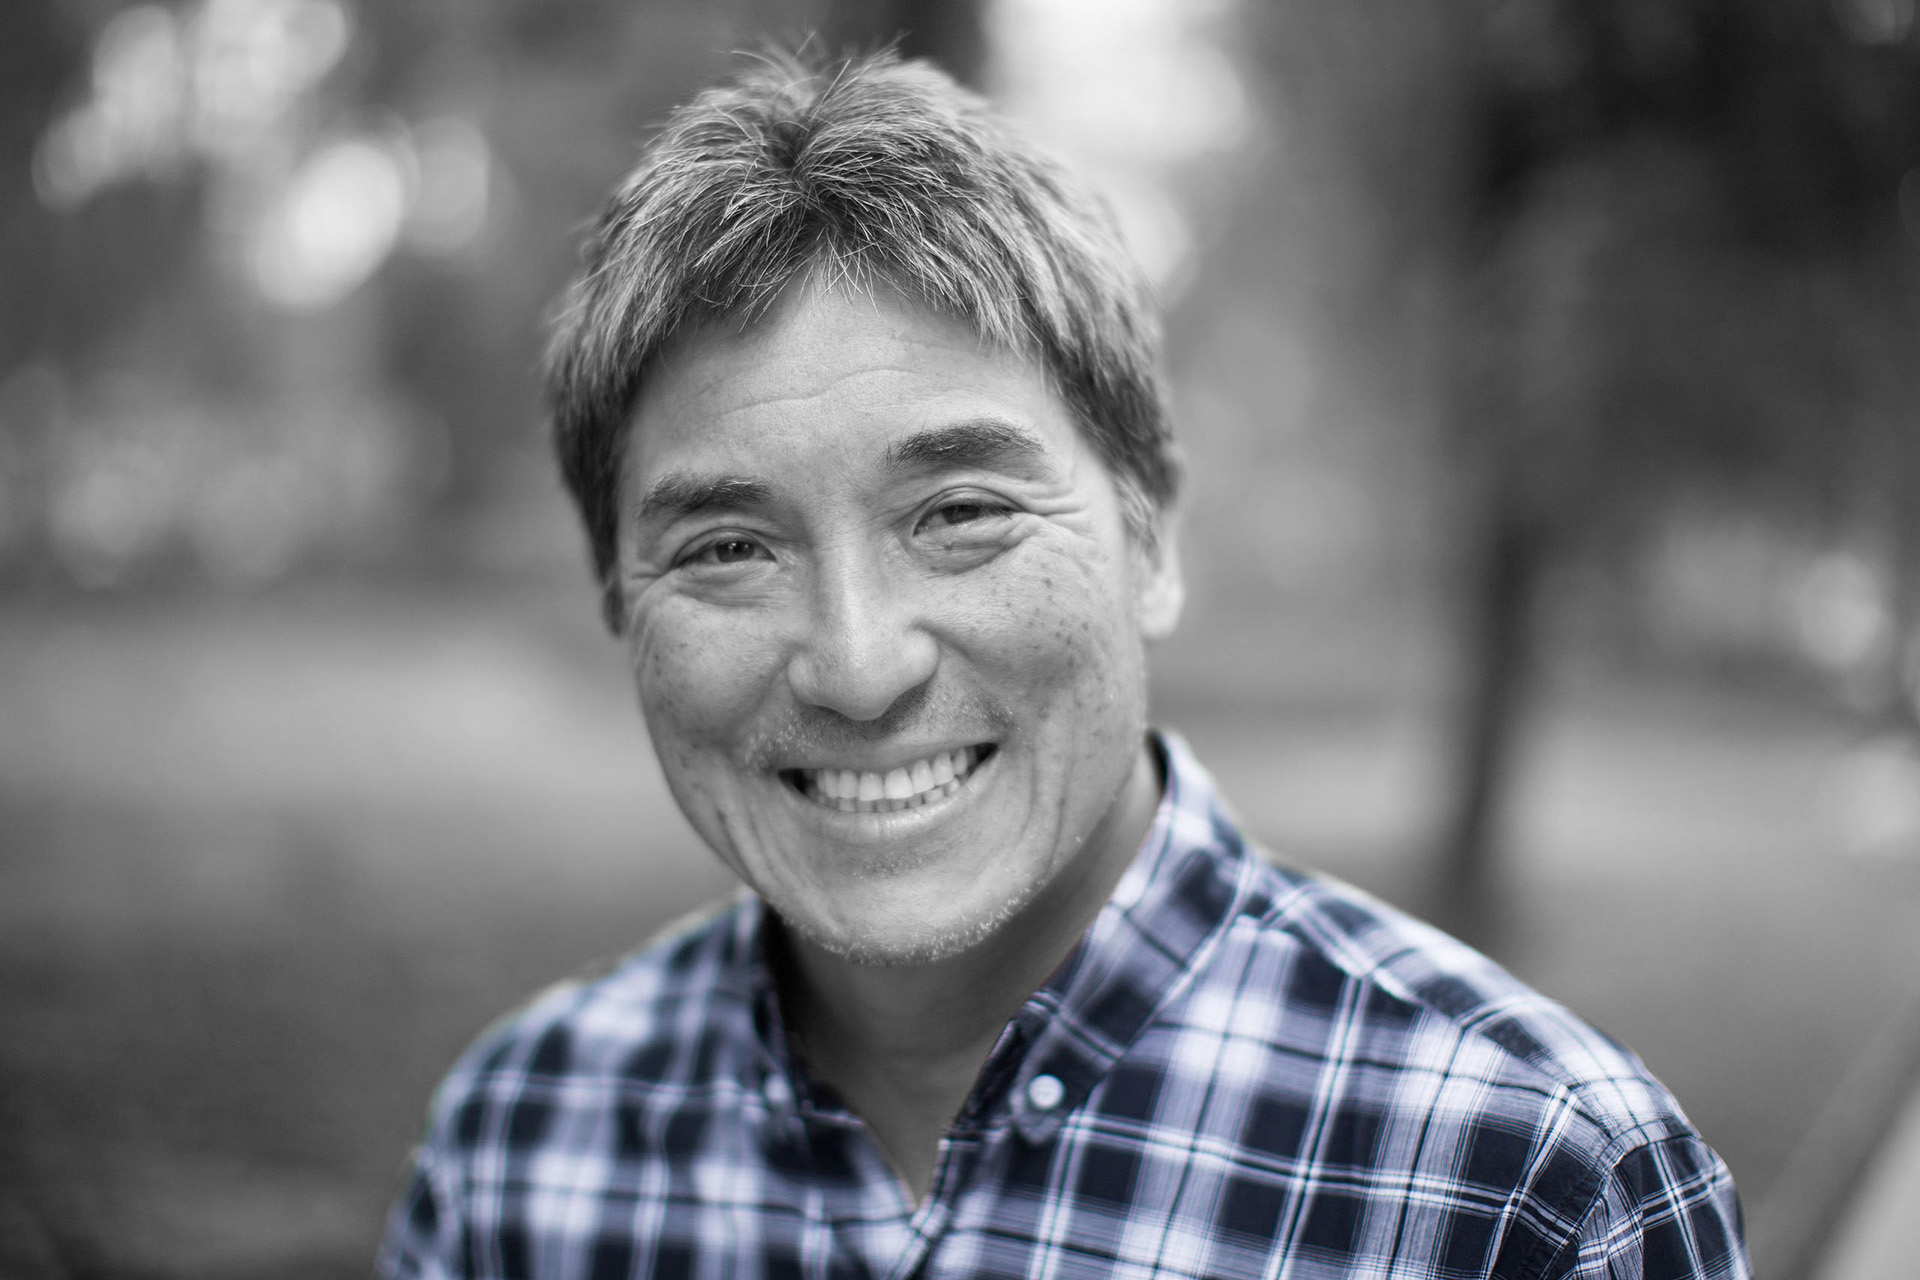 “If you do something worthwhile, you will have competitors. And if there are no competitors, you should think about whether you really have a worthwhile business". Guy Kawasaki's rules of success for tough times